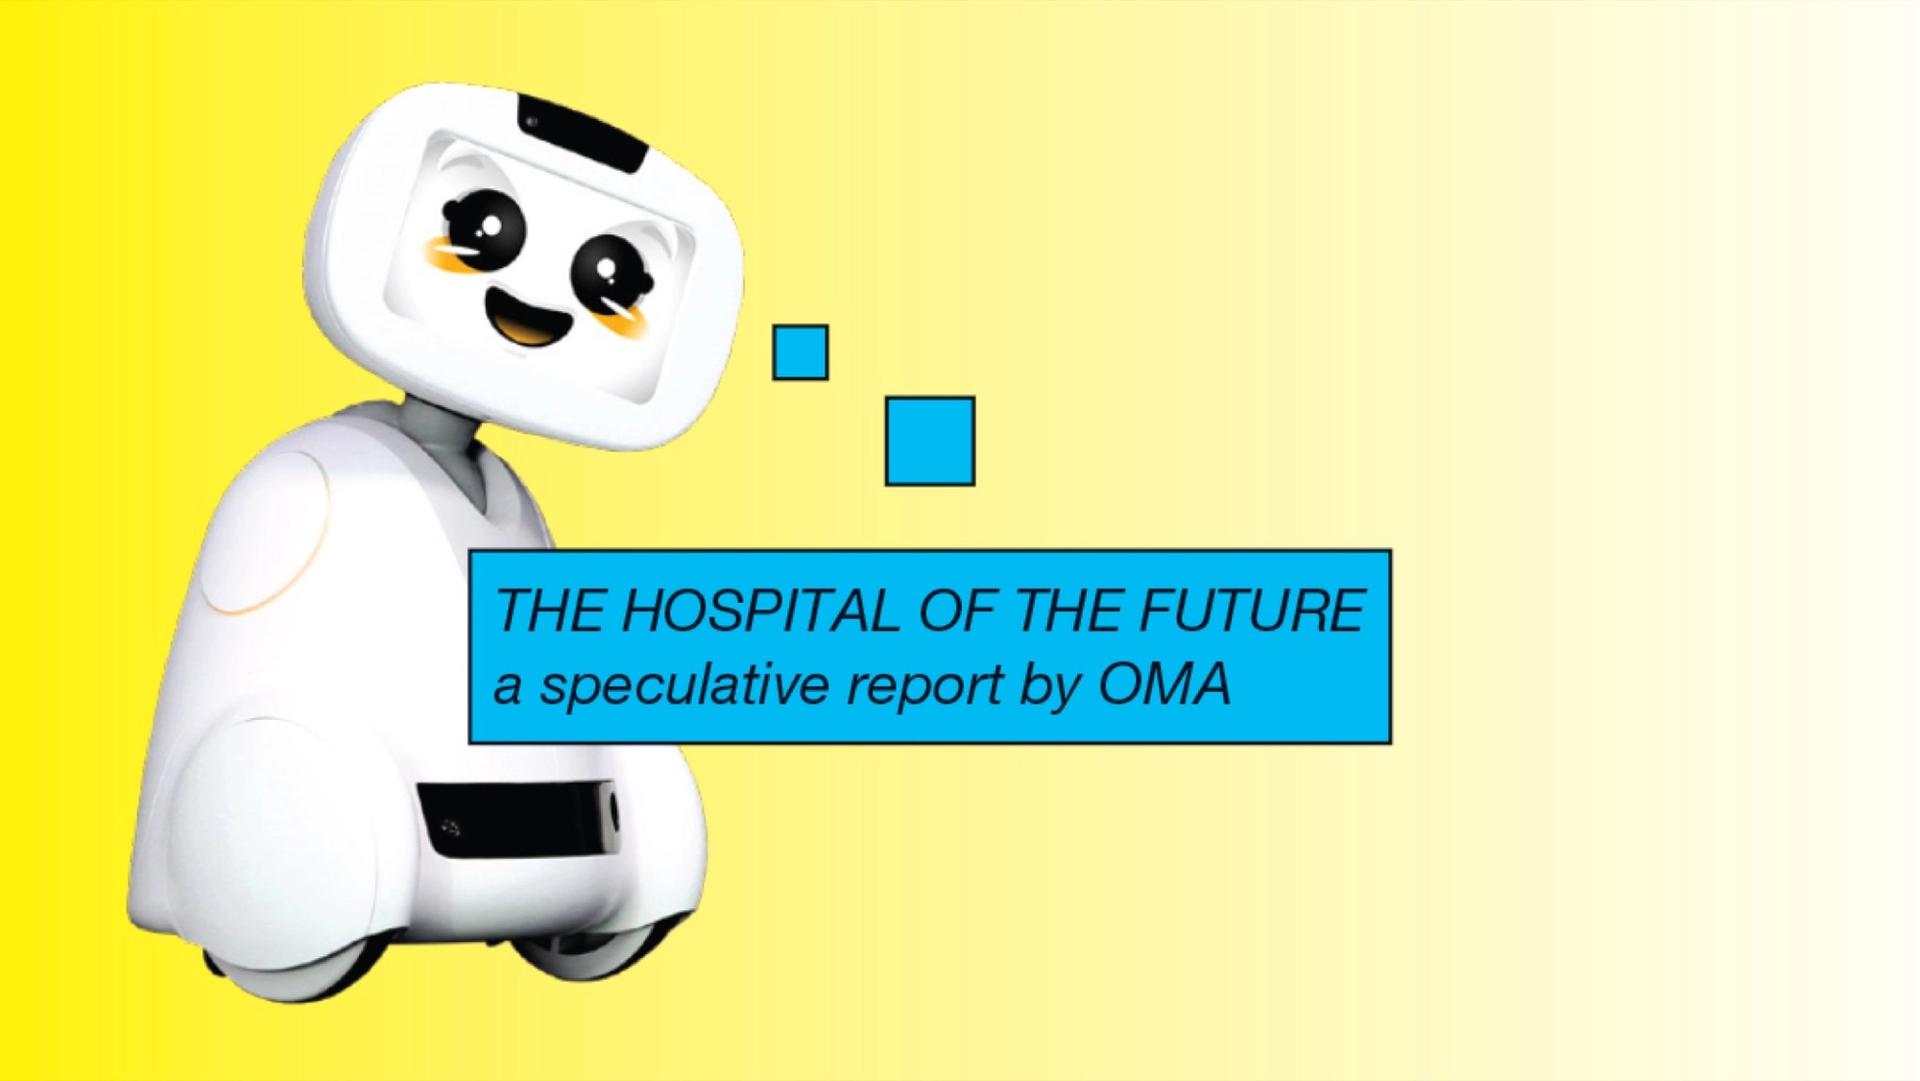 “THE HOSPITAL OF THE FUTURE”: A Speculative Report by OMA